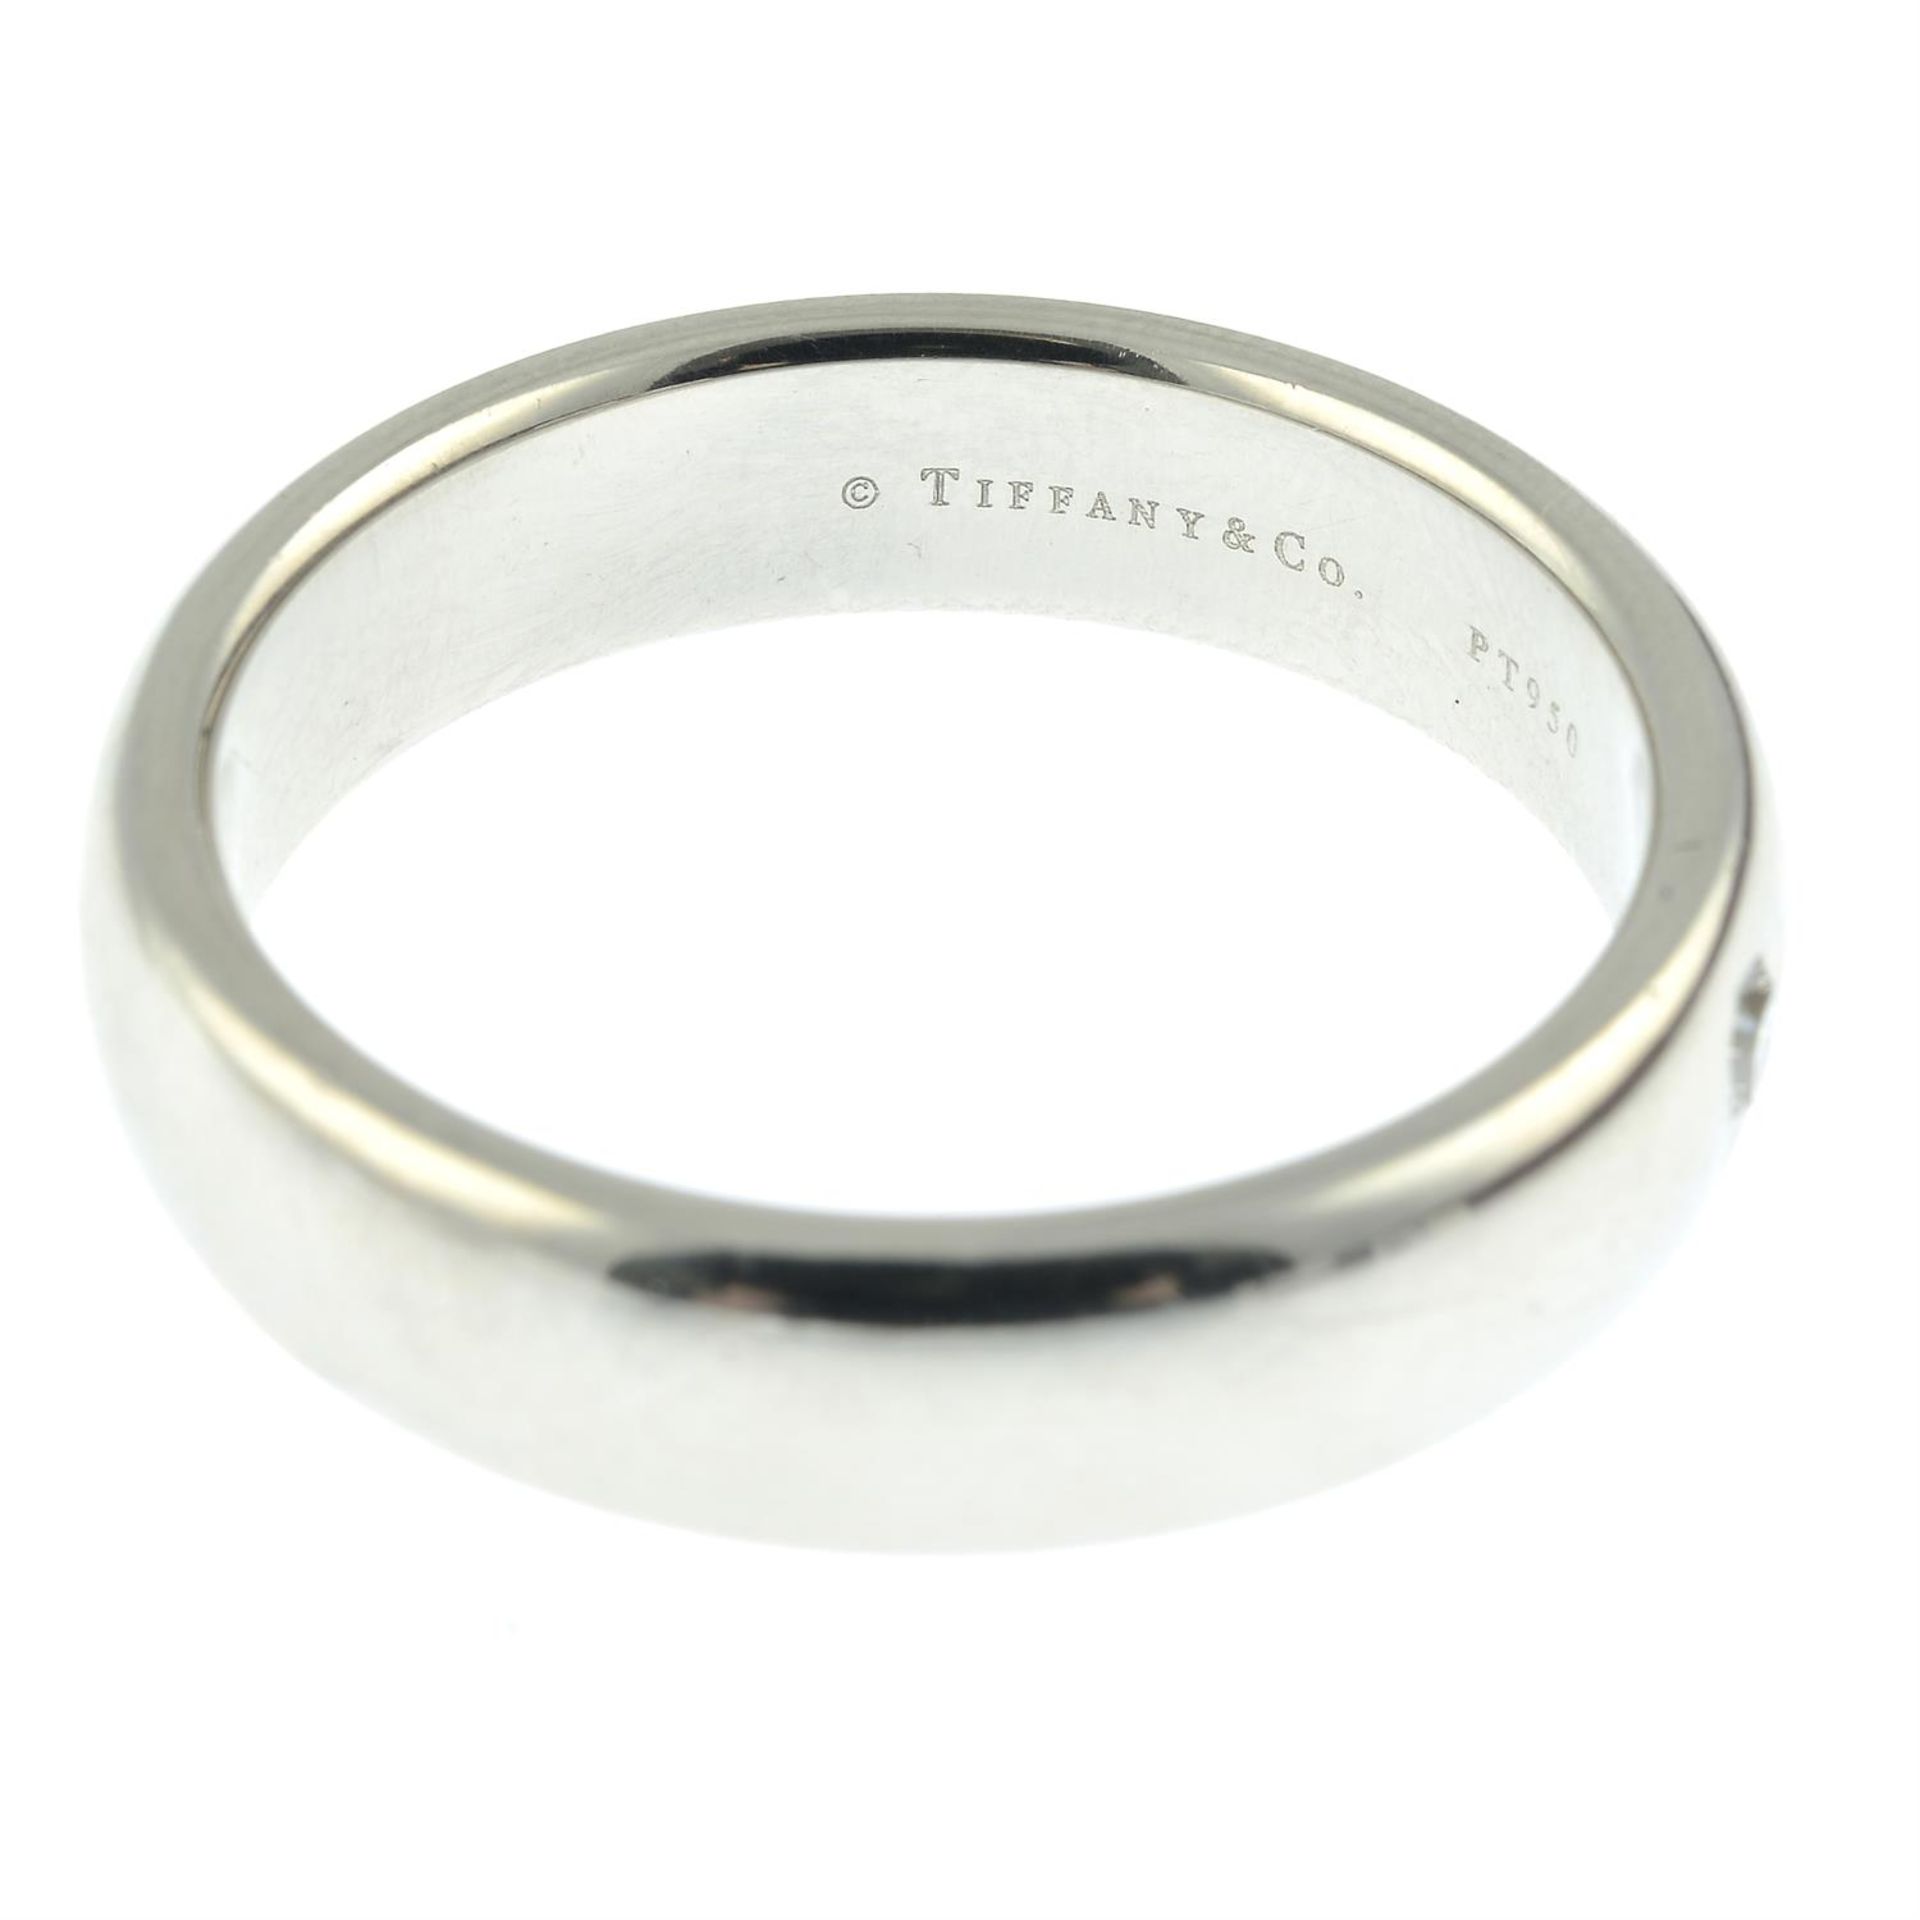 A platinum Lucida-cut diamond 'Classic' wedding band ring, by Tiffany & Co. - Image 5 of 6